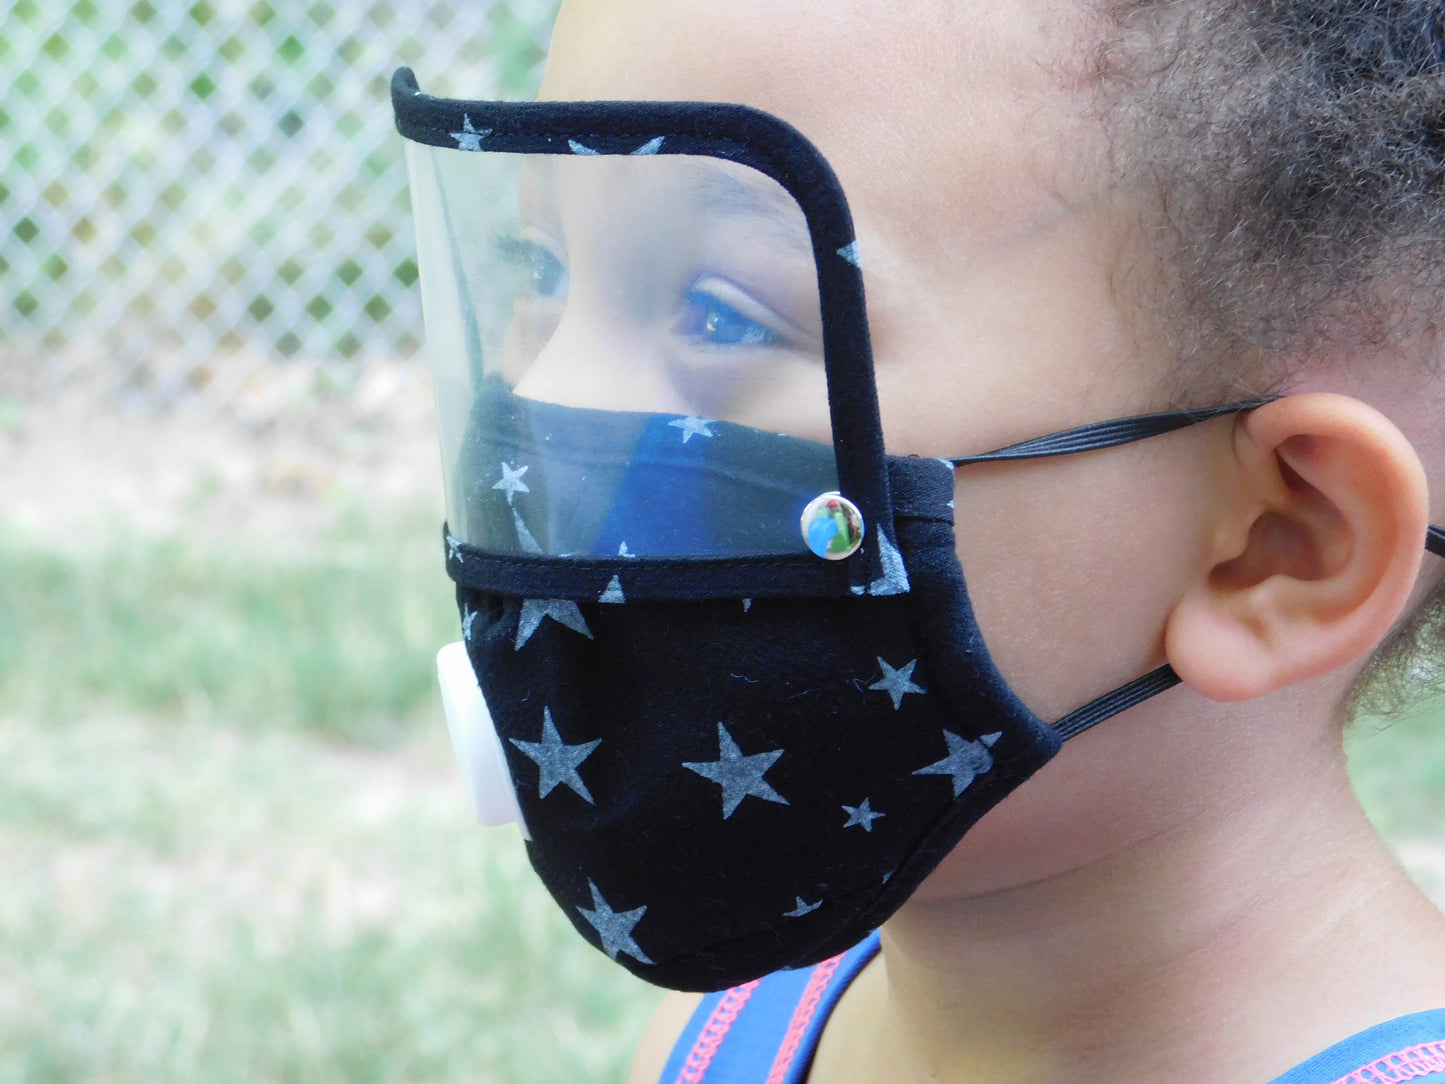 Kids Adjustable Face Mask With Shield, Filter Pocket & 2 Filters. Next Day Shipping